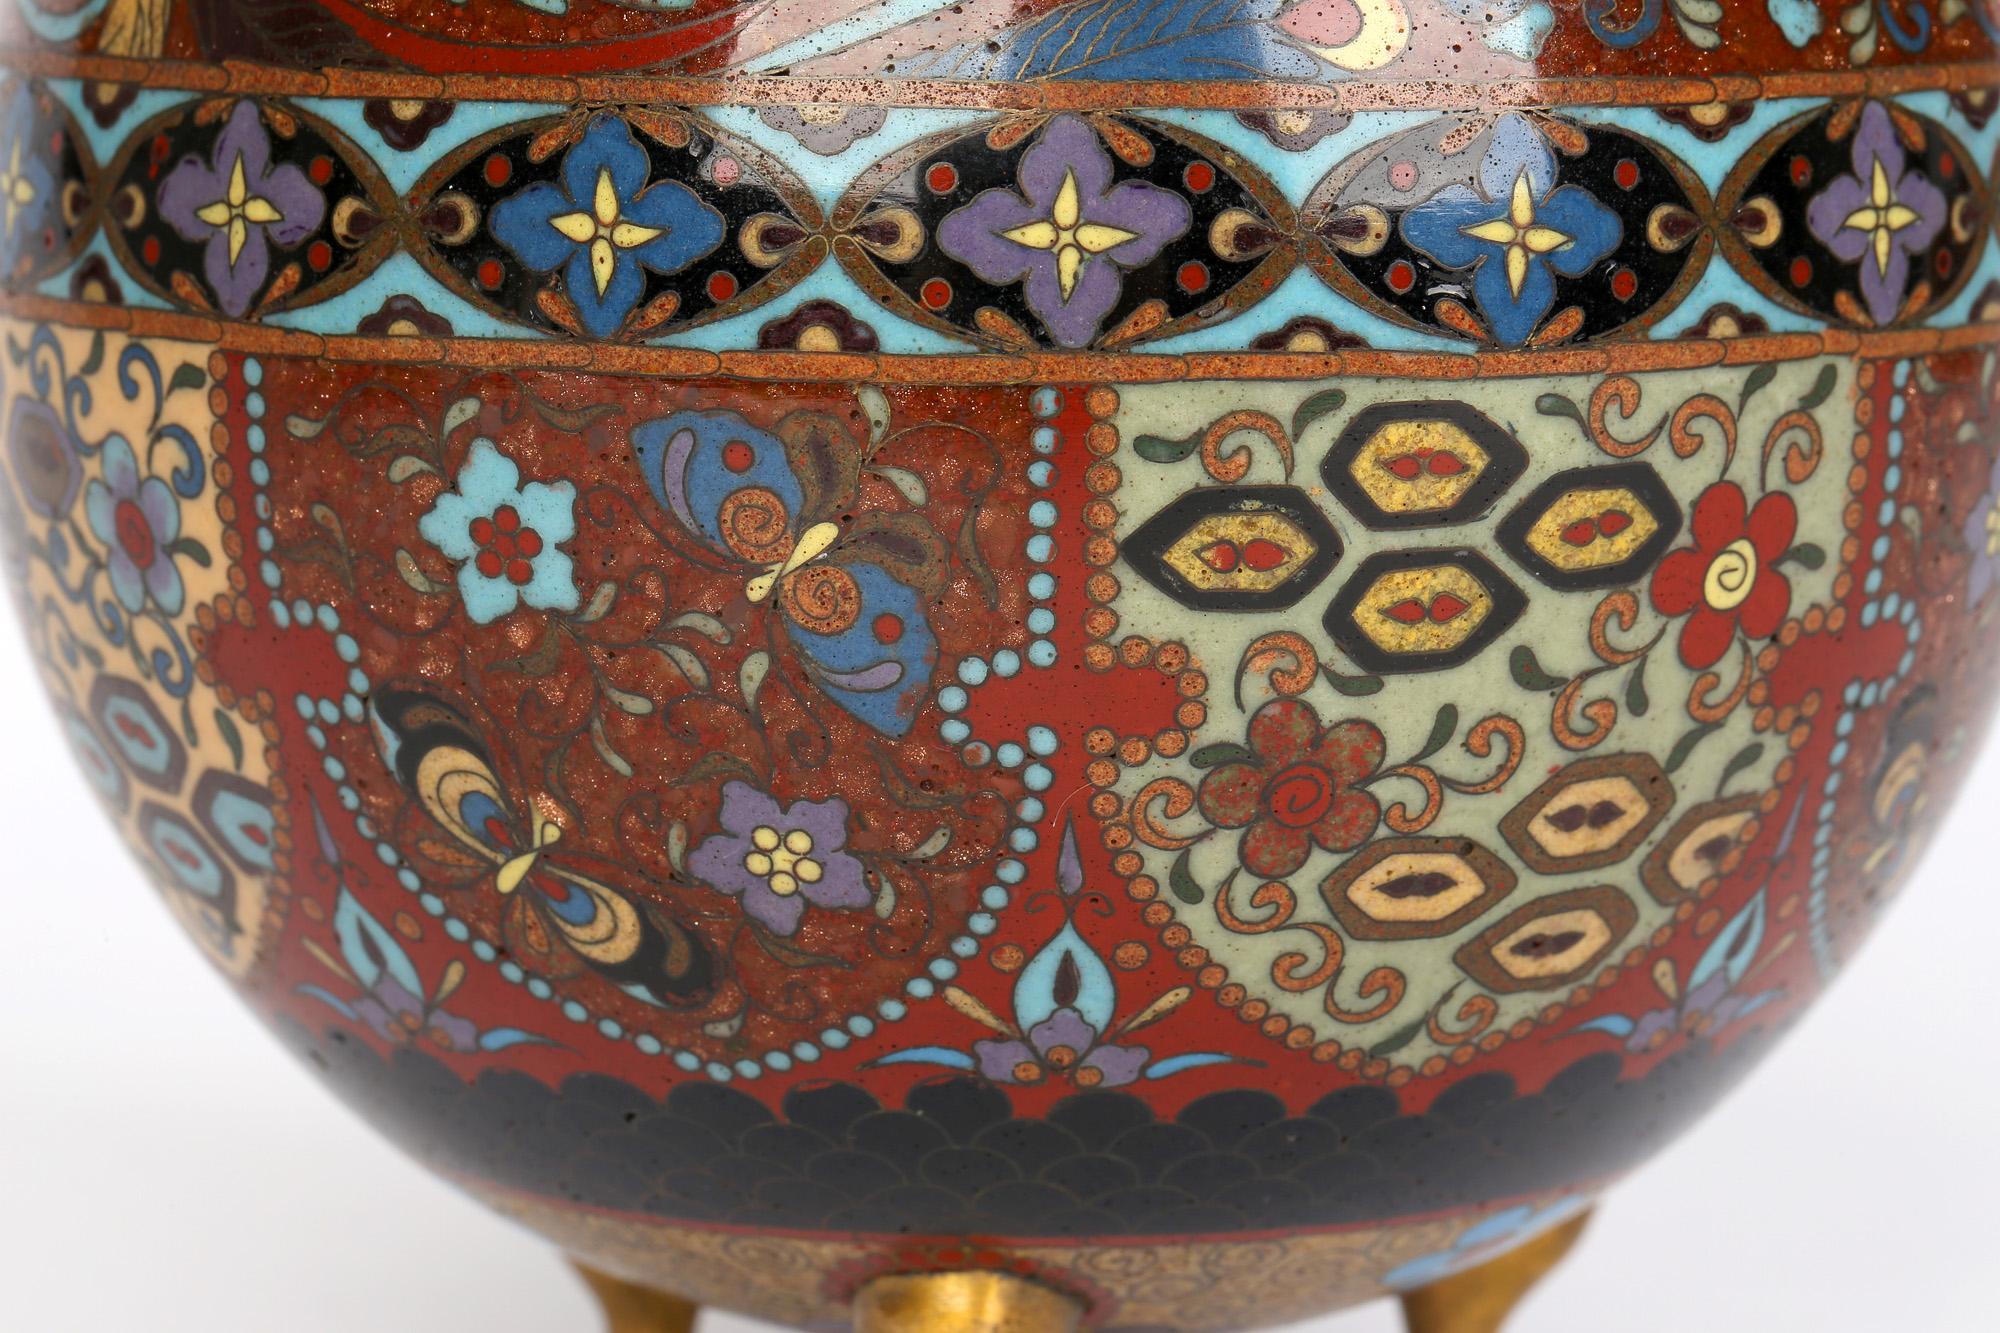 Japanese Meiji cloisonné tea caddy exquisitely decorated with Ho Ho birds above decorative shield shaped panels probably dating from around 1870. The tea caddy is of rounded shape standing raised on three shaped small brass feet and with a recessed